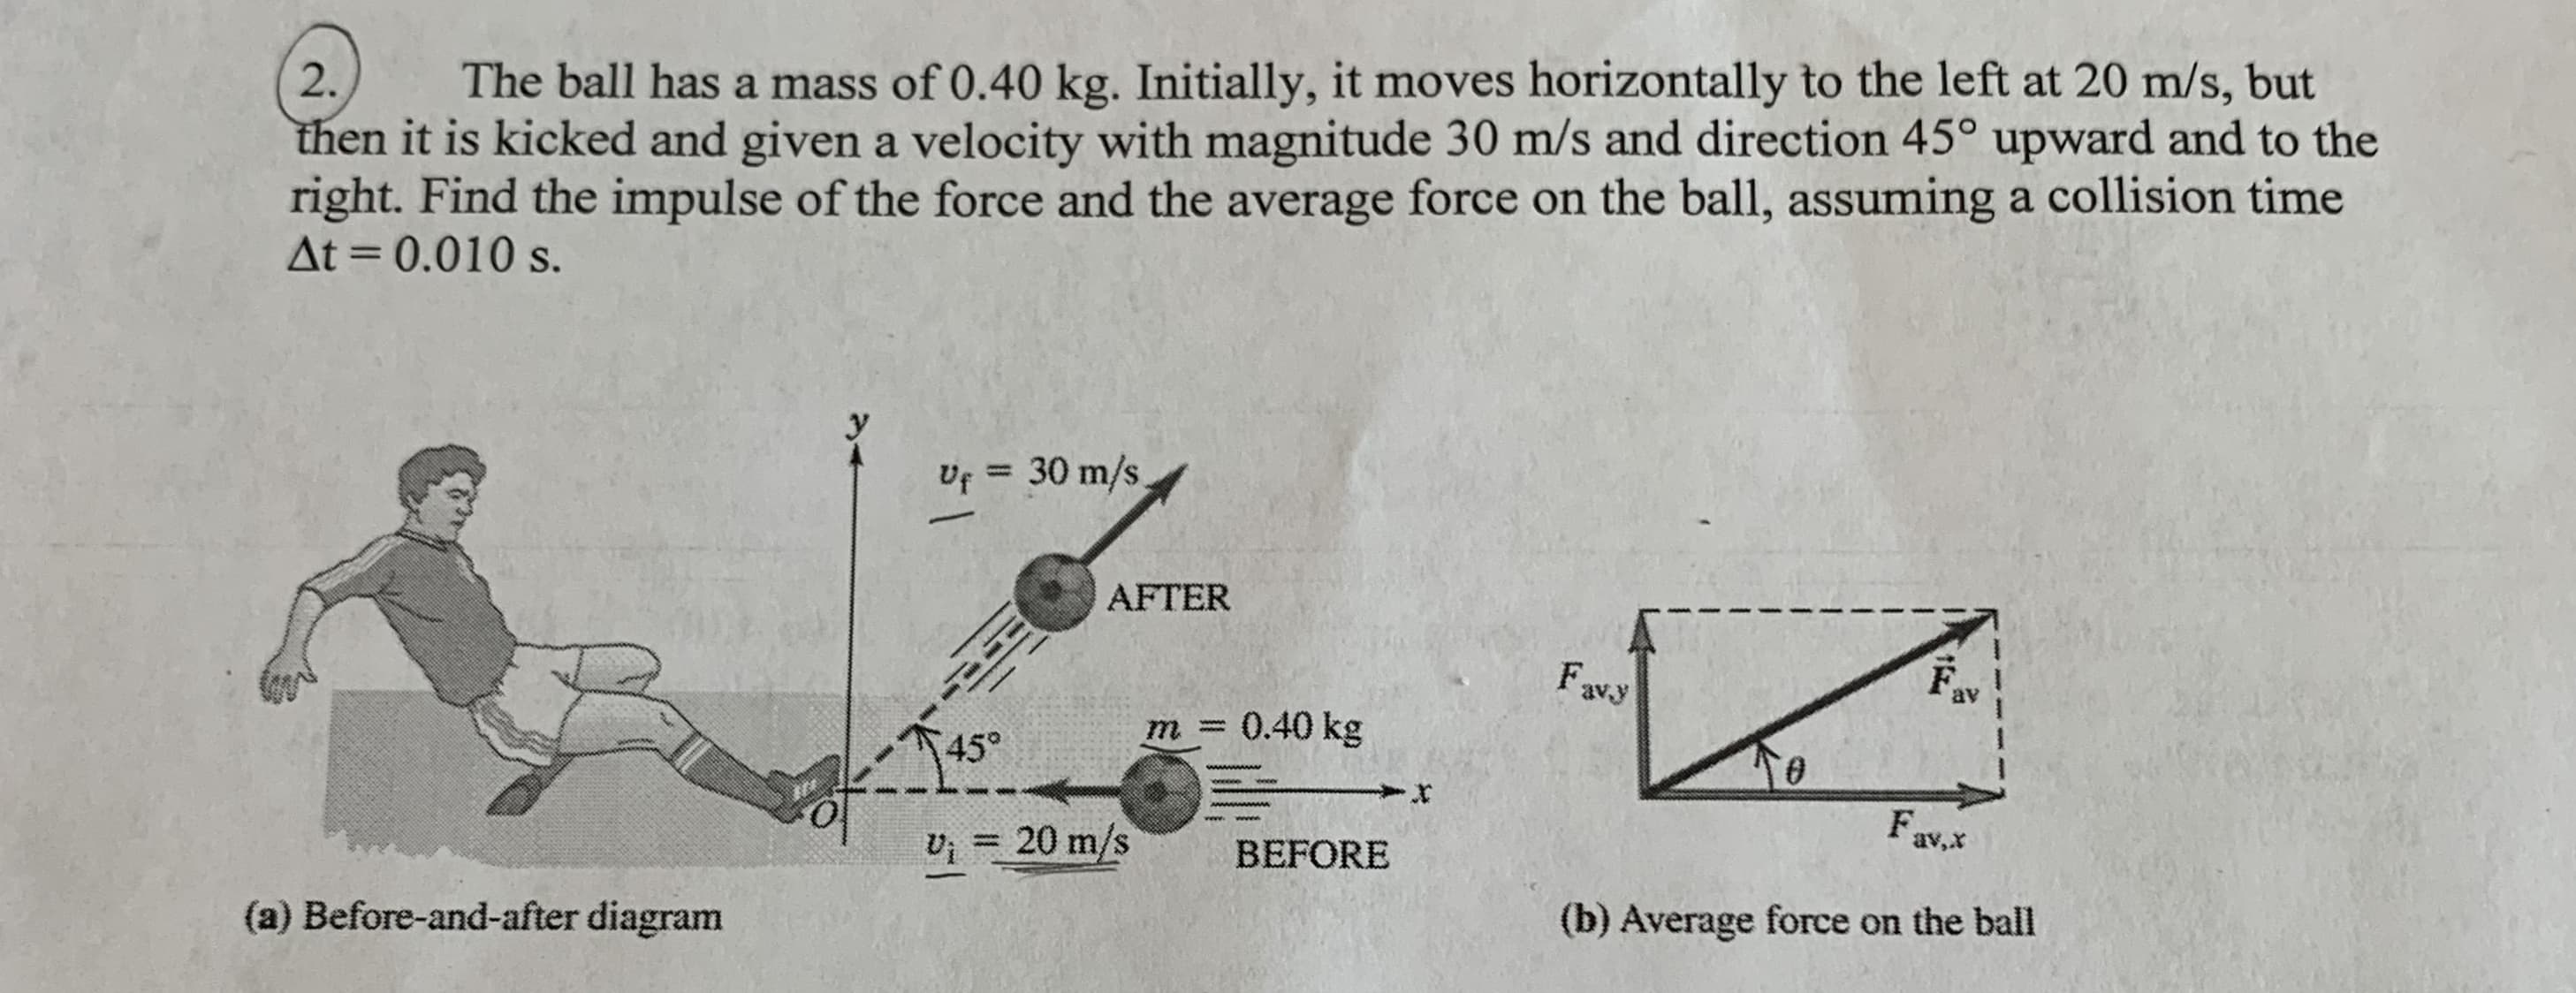 The ball has a mass of 0.40 kg. Initially, it moves horizontally to the left at 20 m/s, but
2.
then it is kicked and given a velocity with magnitude 30 m/s and direction 45° upward and to the
right. Find the impulse of the force and the average force on the ball, assuming a collision time
At 0.010 s.
Uf 30 m/s
AFTER
avy
0.40 kg
m.
45°
wwwww
F.
Ui 20 m/s
av,x
BEFORE
(a) Before-and-after diagram
(b) Average force on the ball
